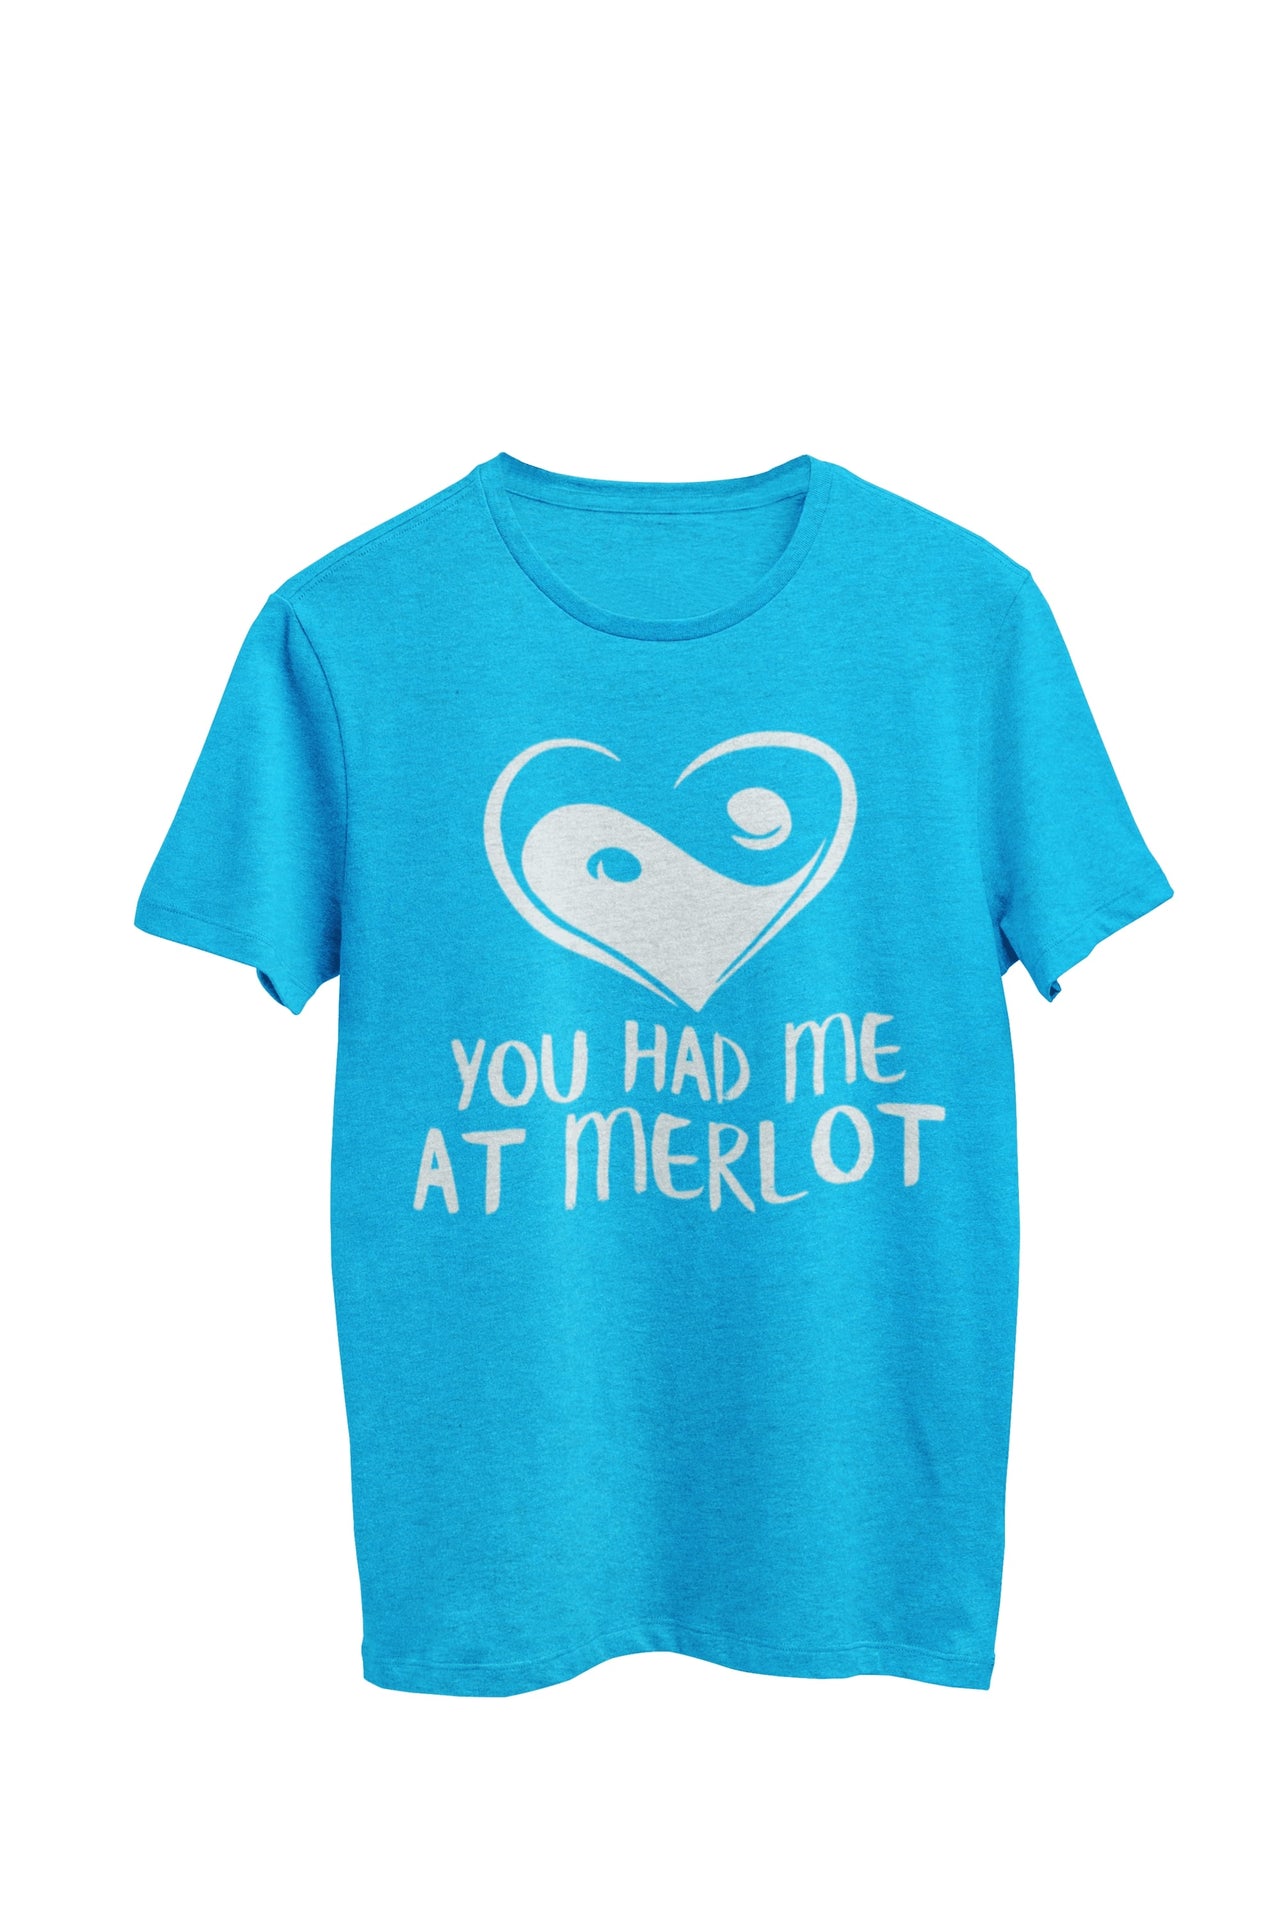 Heather Turquoise Unisex T-Shirt with heart yin yang symbol and text 'you had me at merlot,' designed by WooHoo Apparel."